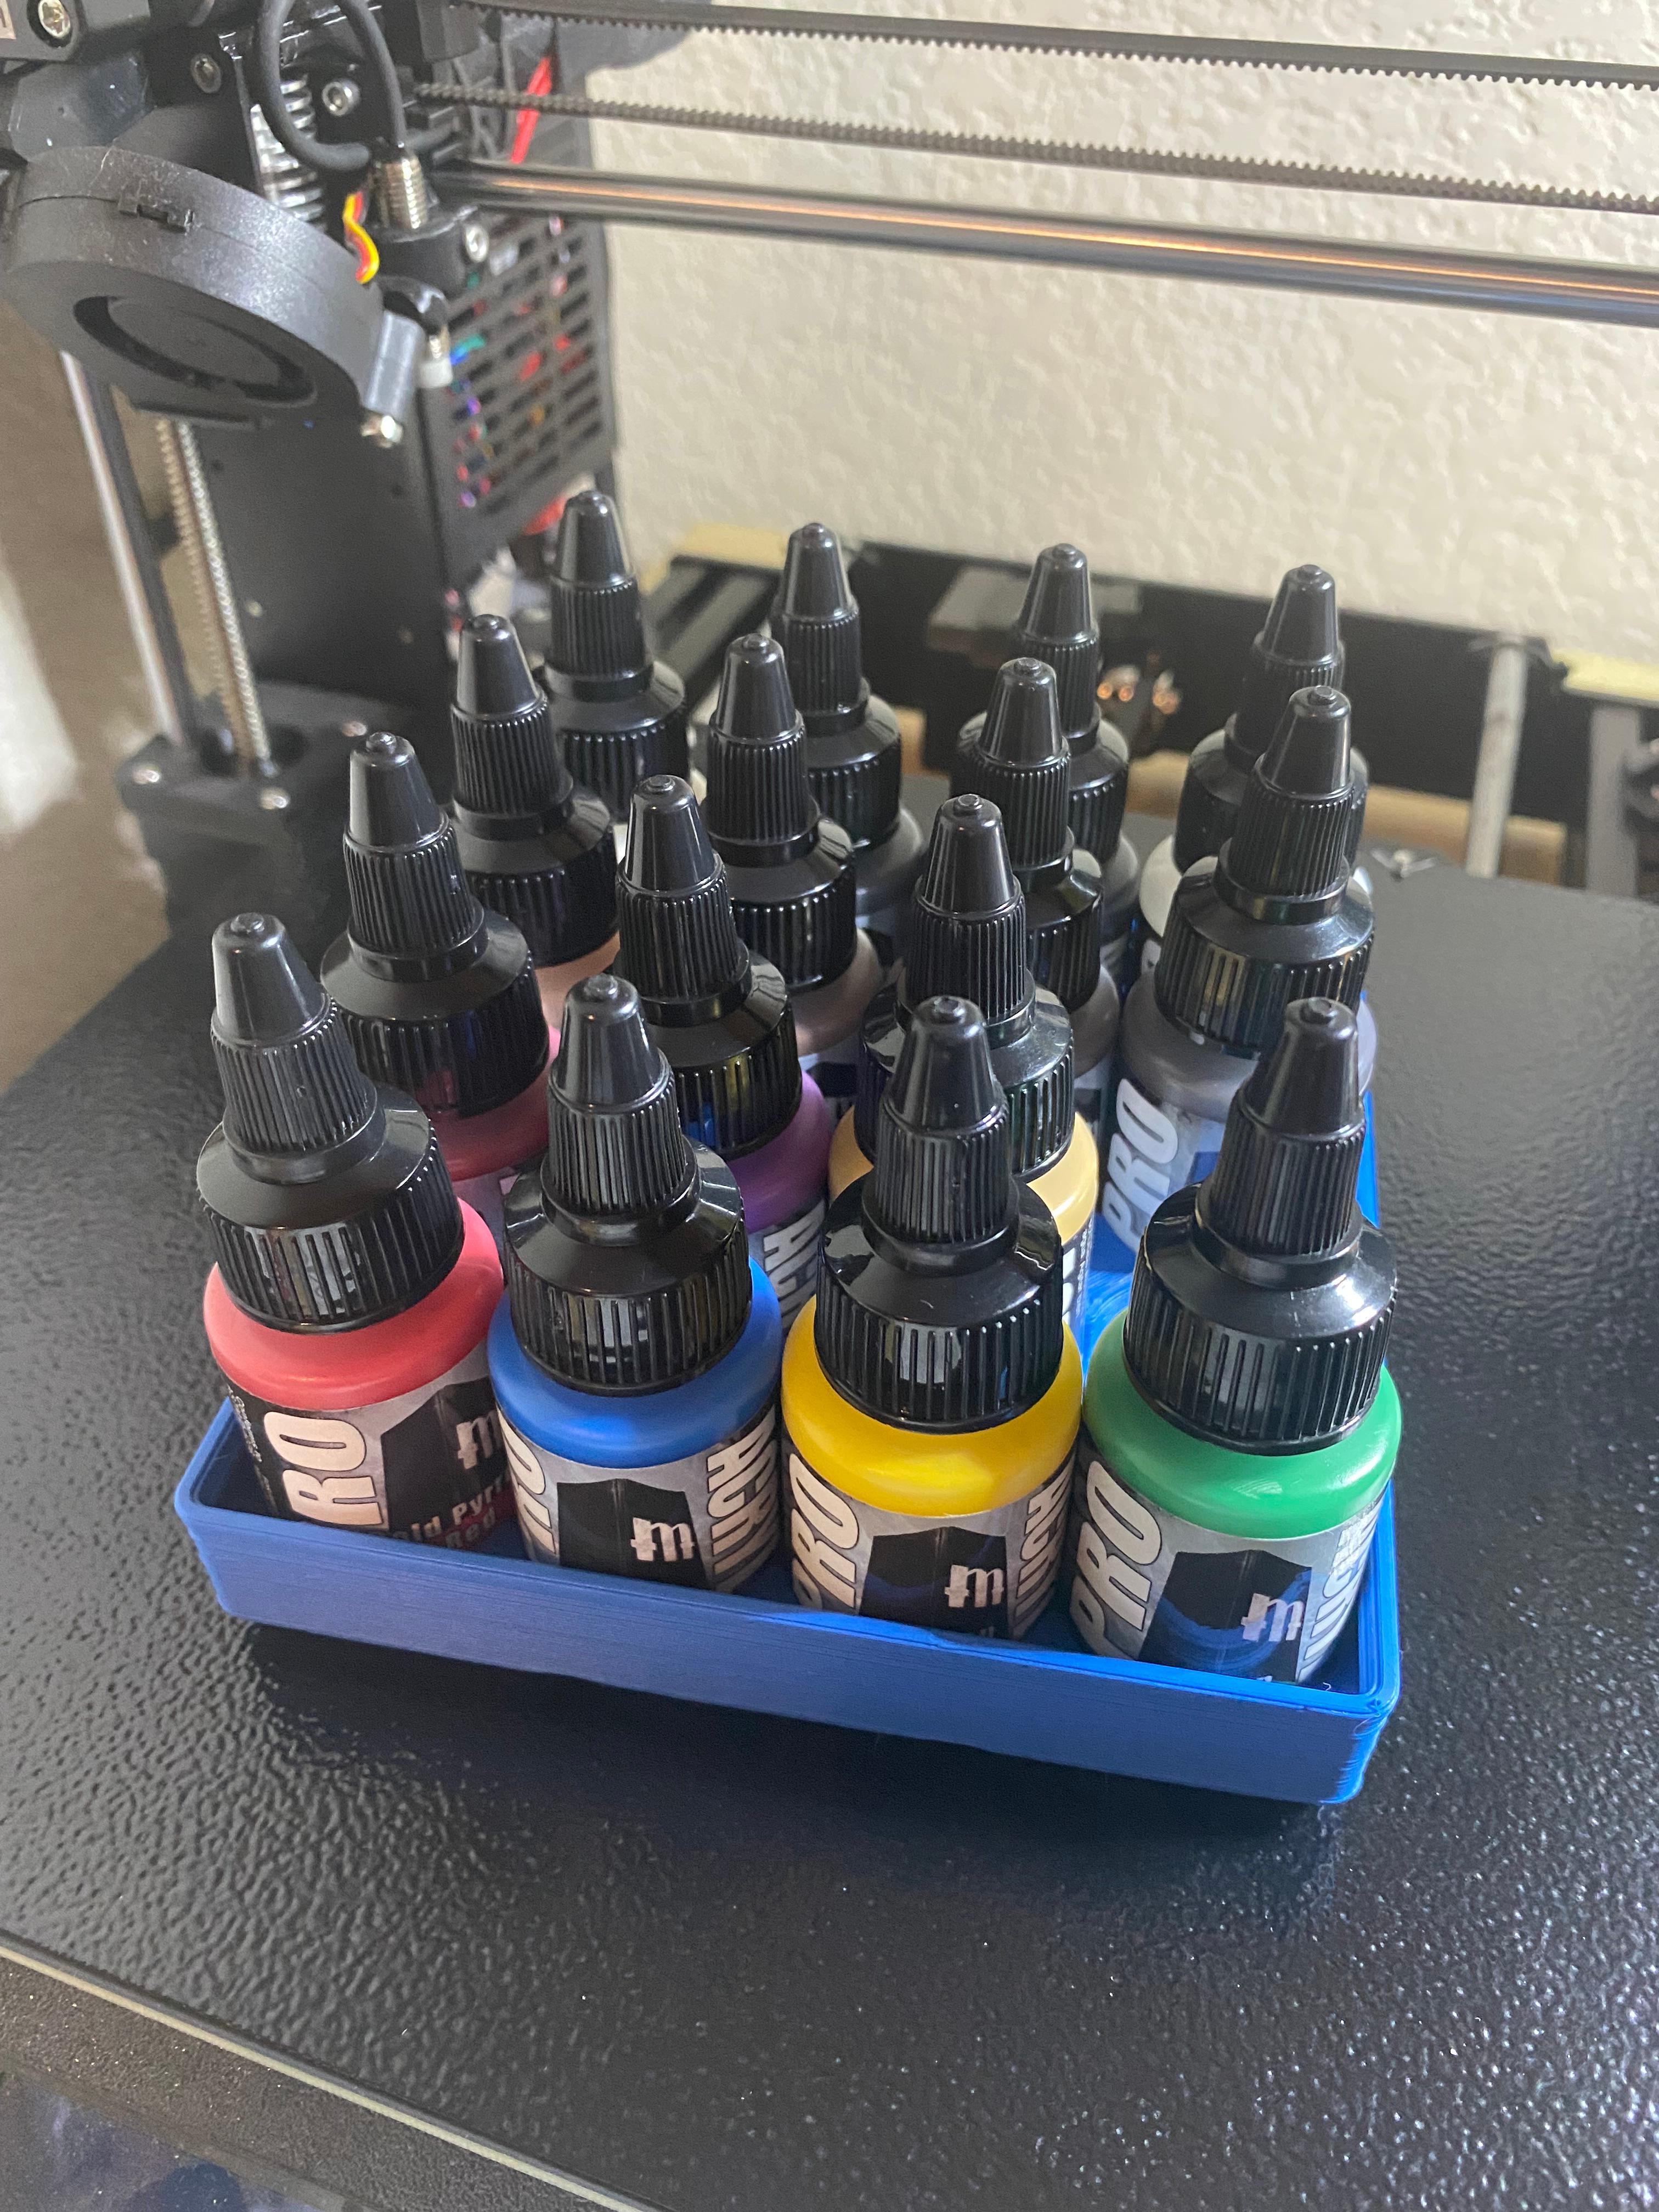 Gridfinity Paintbrush Holder by Maker Null